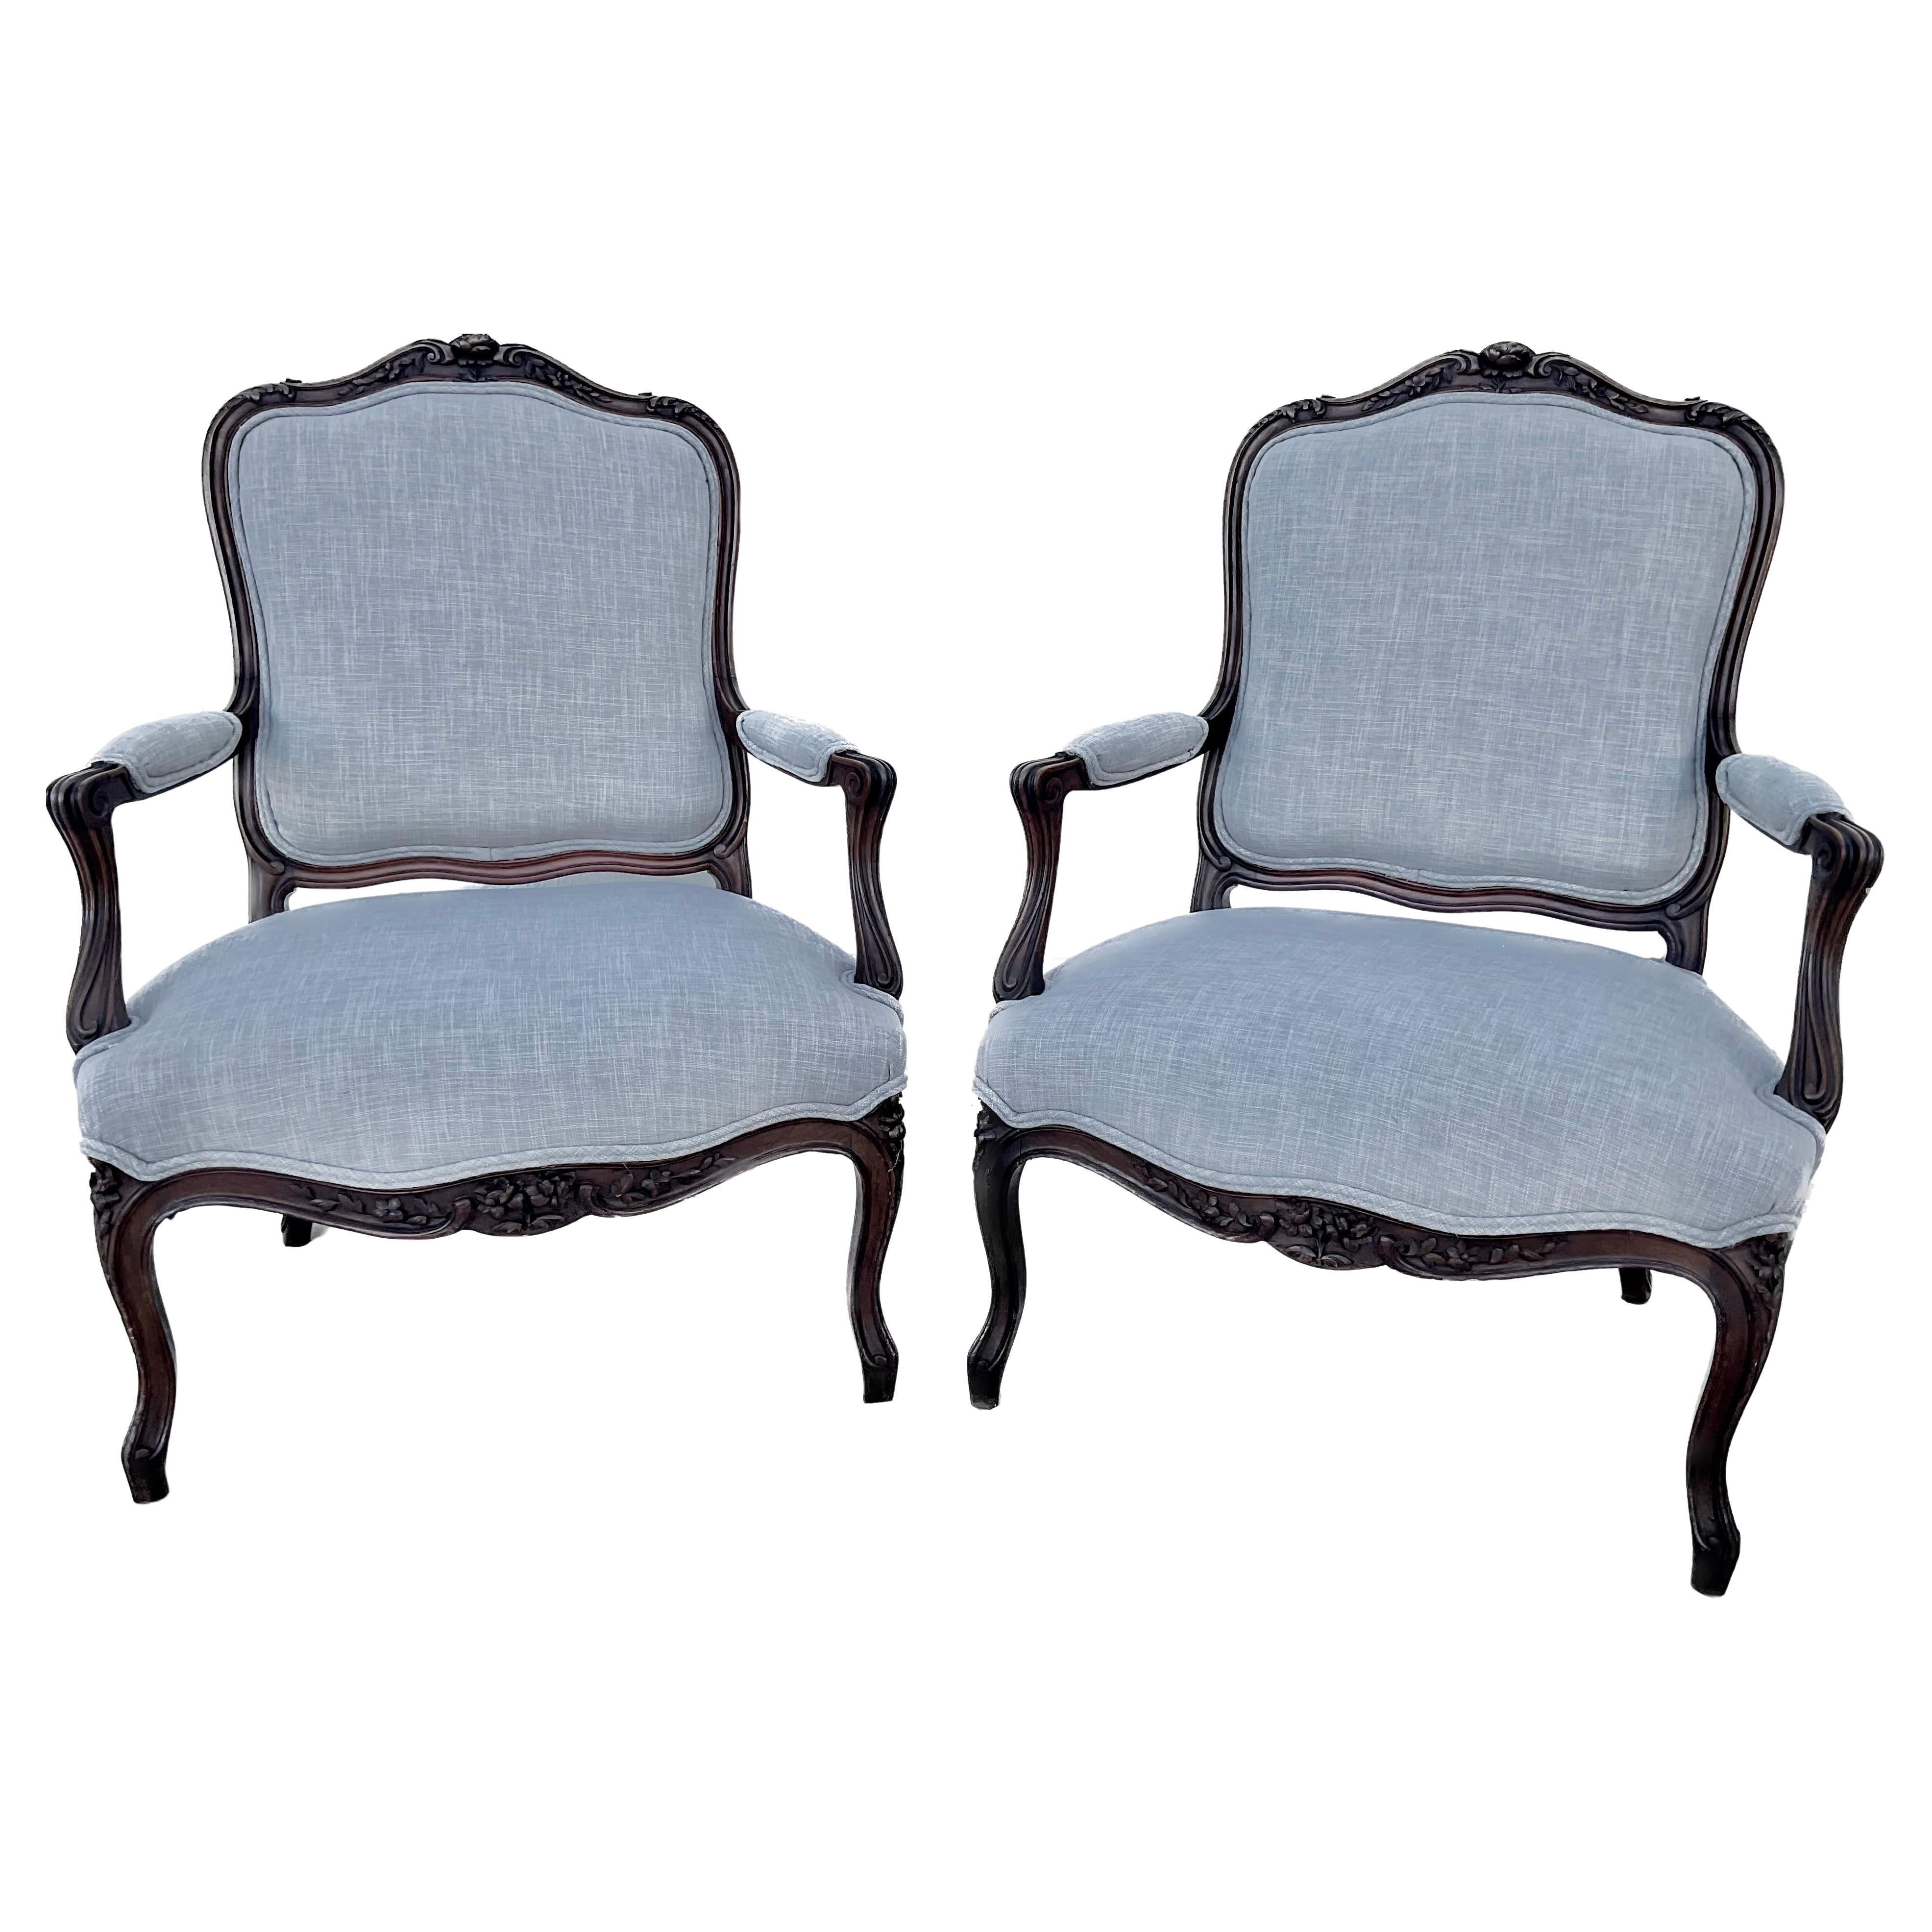 Pair of 19th Century French Louis XV Carved Wood And Upholstered Arm Chairs For Sale